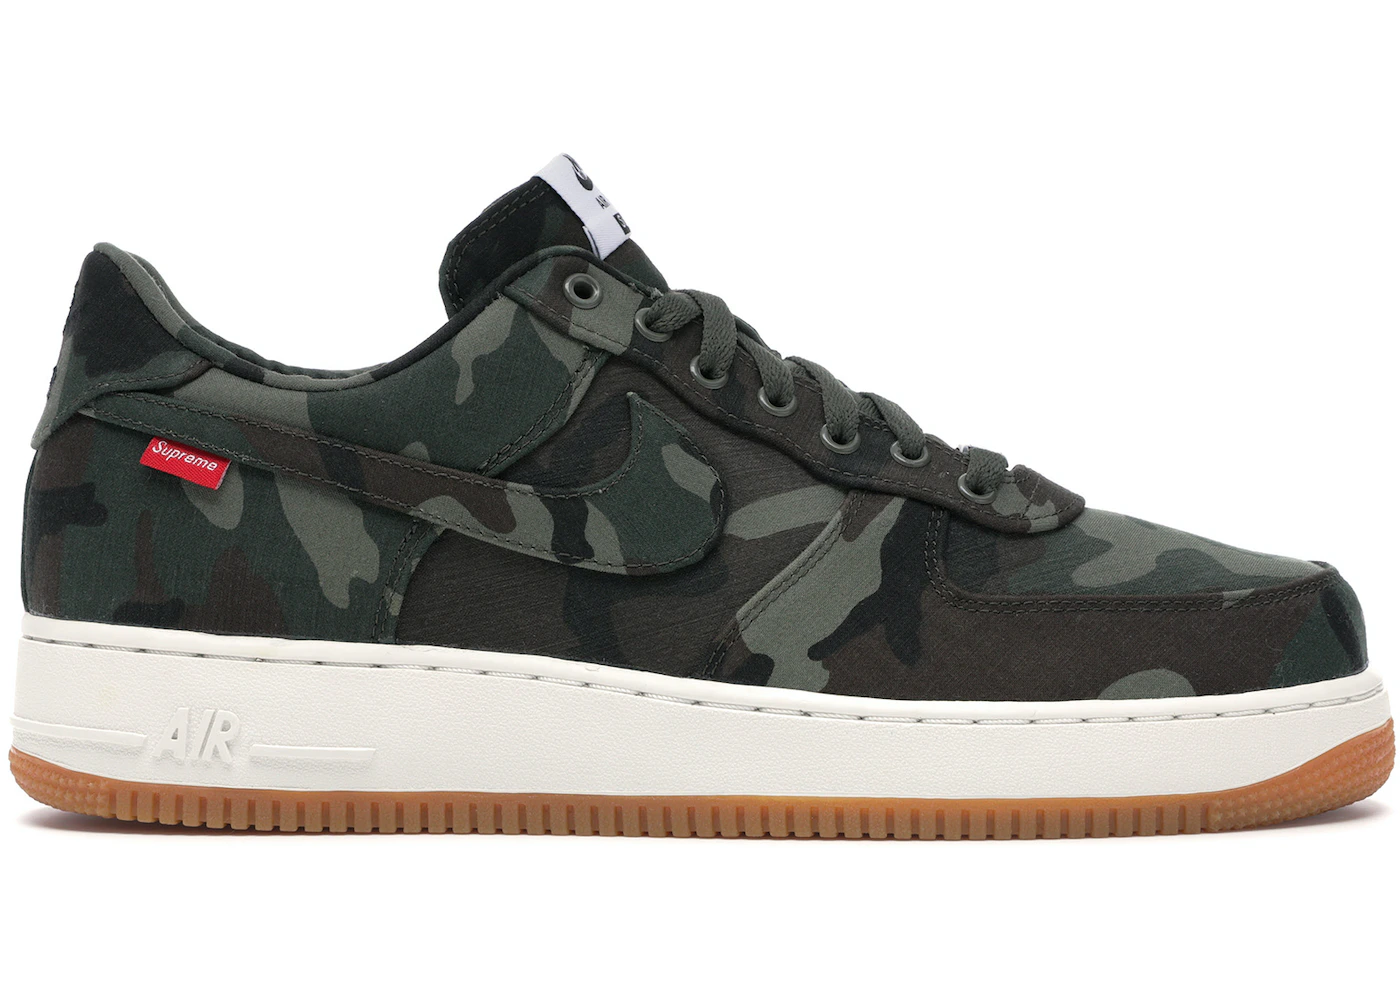 Nike Air Force 1 Low Supreme Camouflage - 573488-330 - US